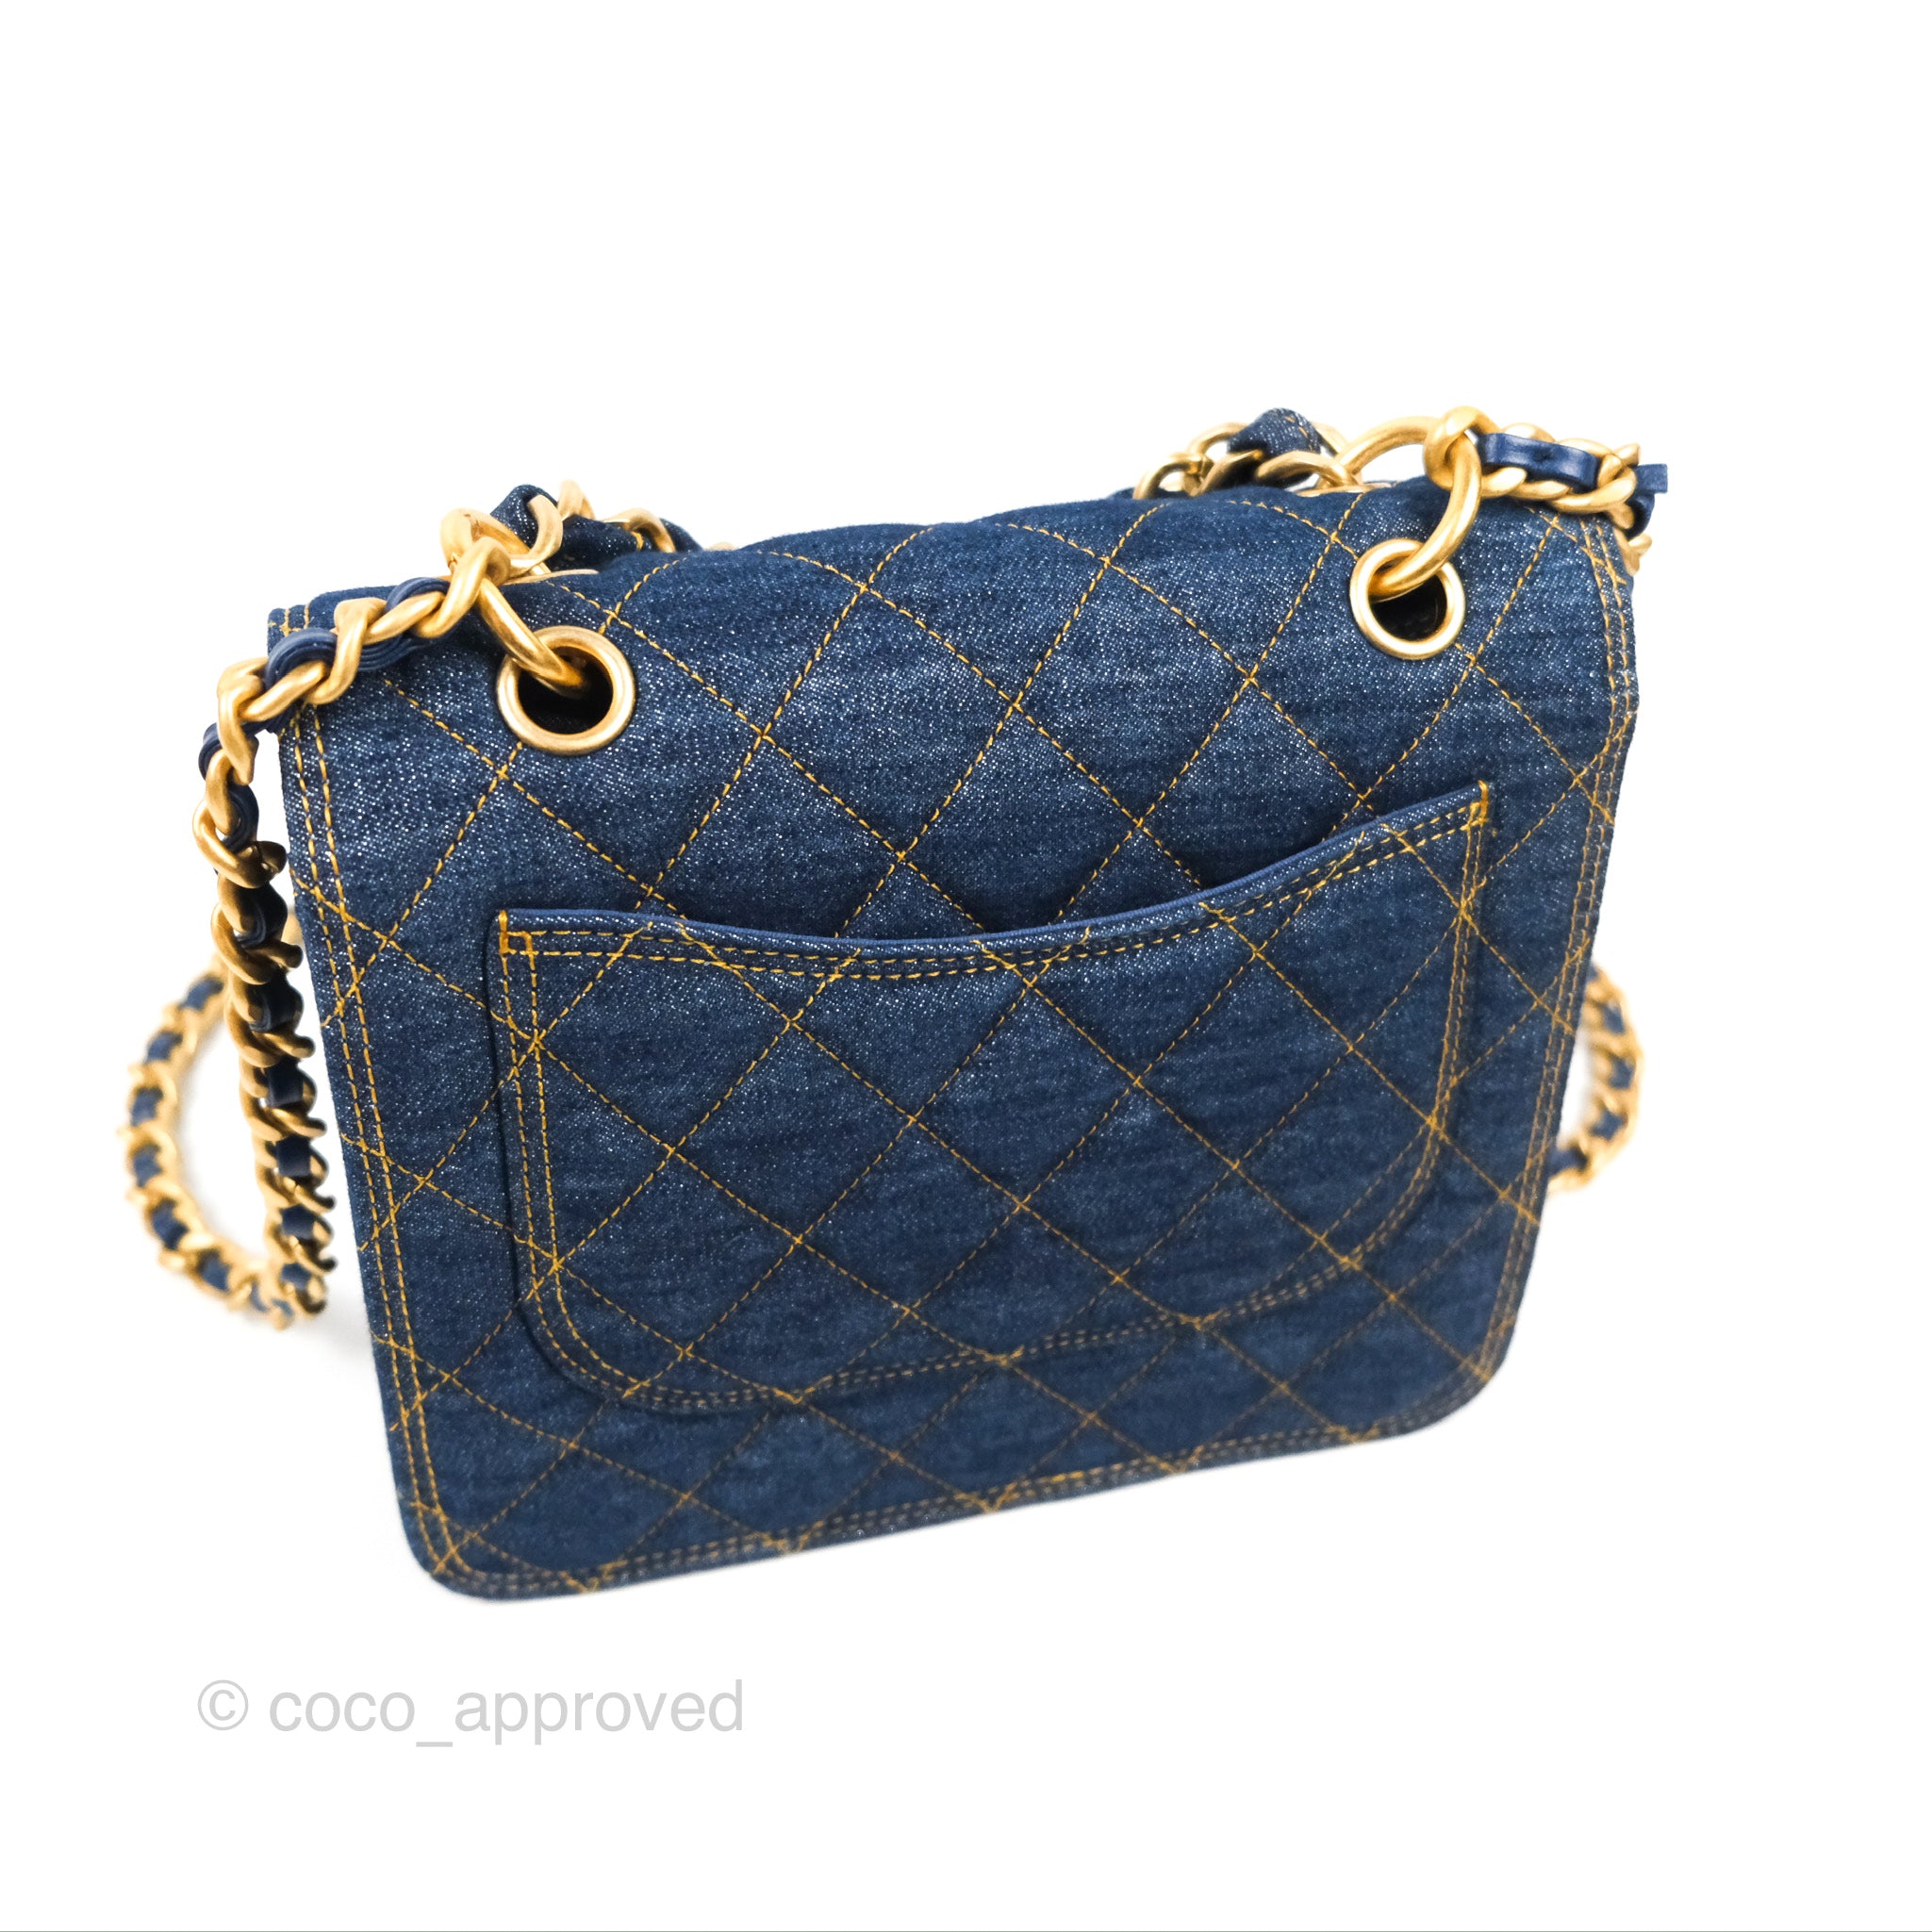 Chanel Denim Quilted Mini Flap Bag - Chanel